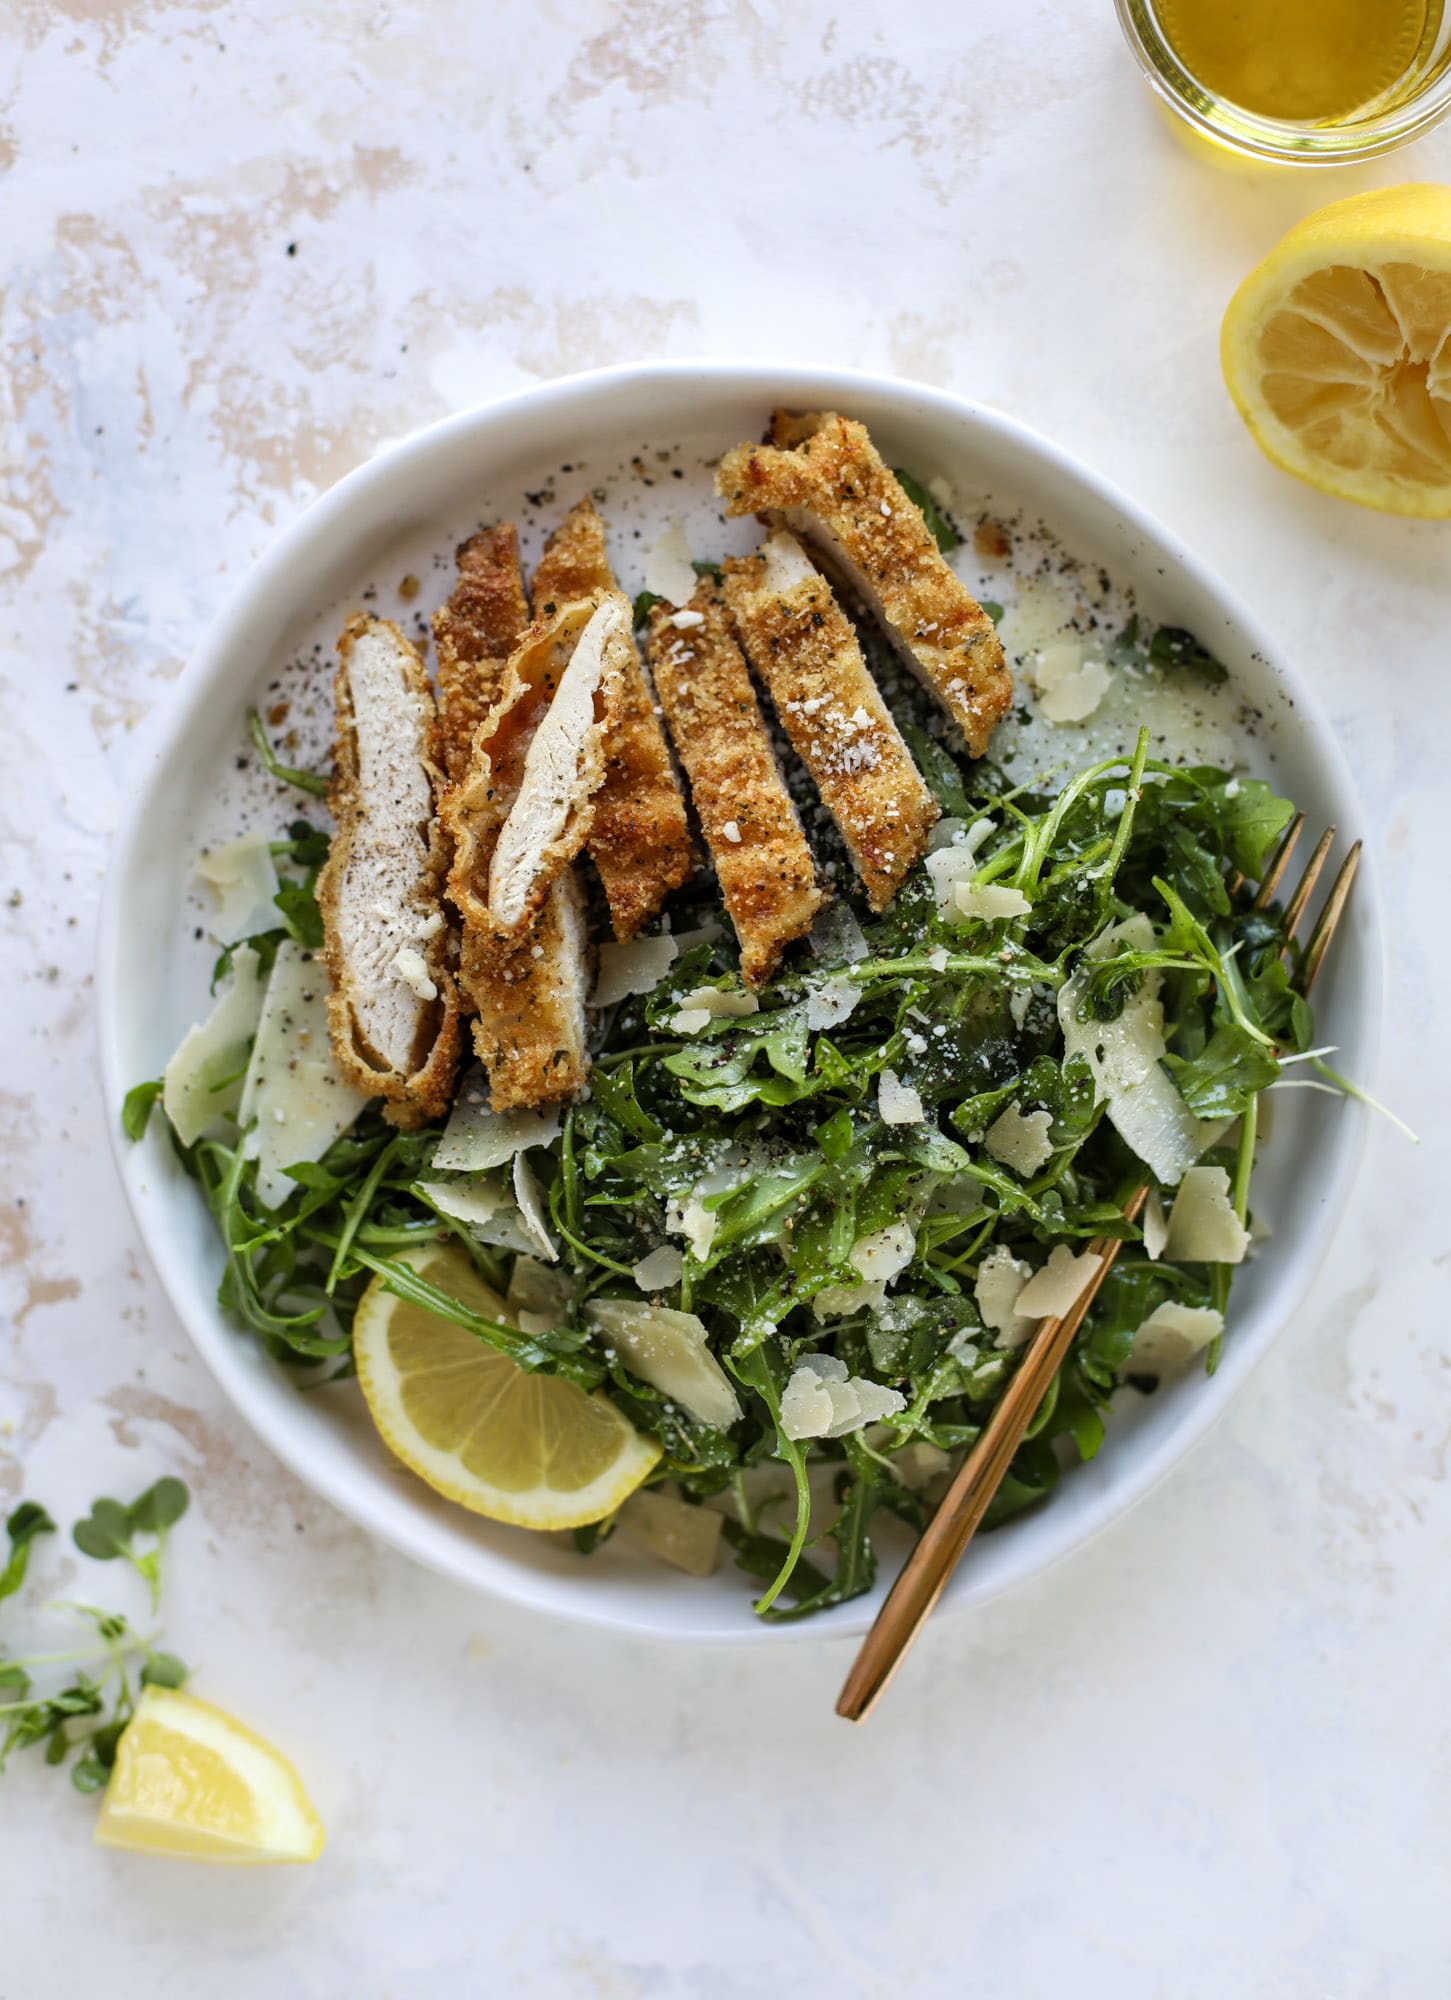 Crispy baked parmesan chicken is so super easy and delicious! It's an amazing weeknight meal served with a lemon arugula salad. Delish!